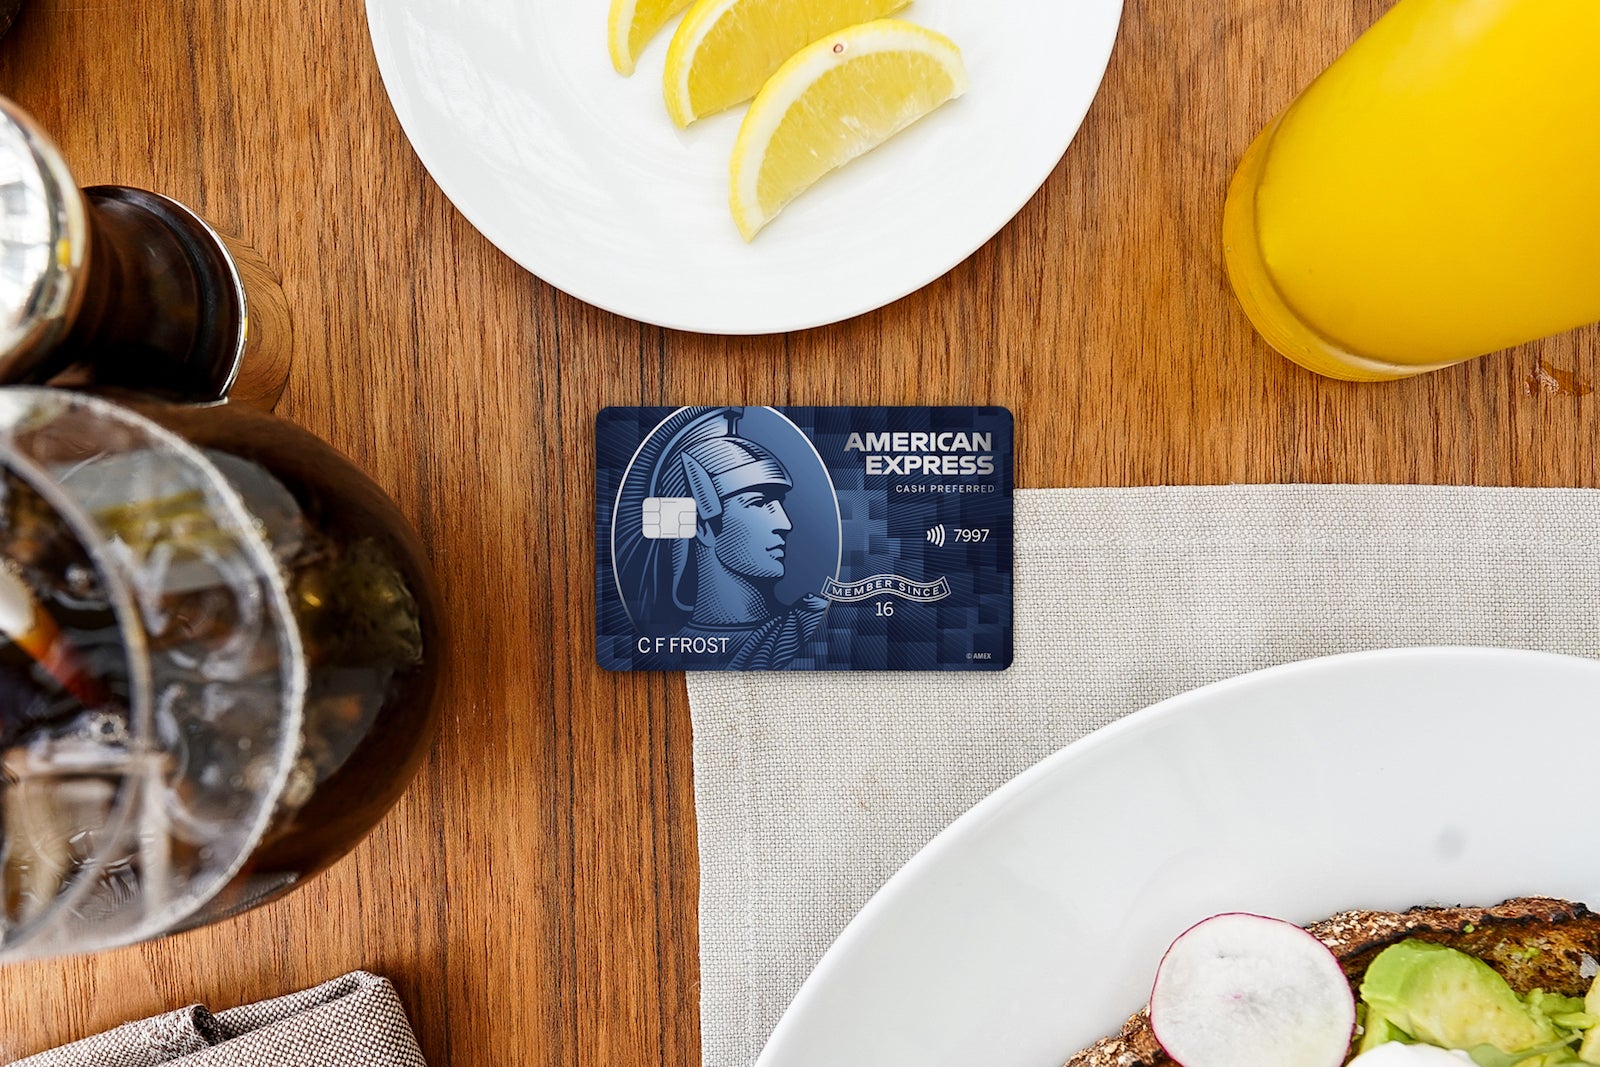 A credit card sits on a table surrounded by food and drink dishes